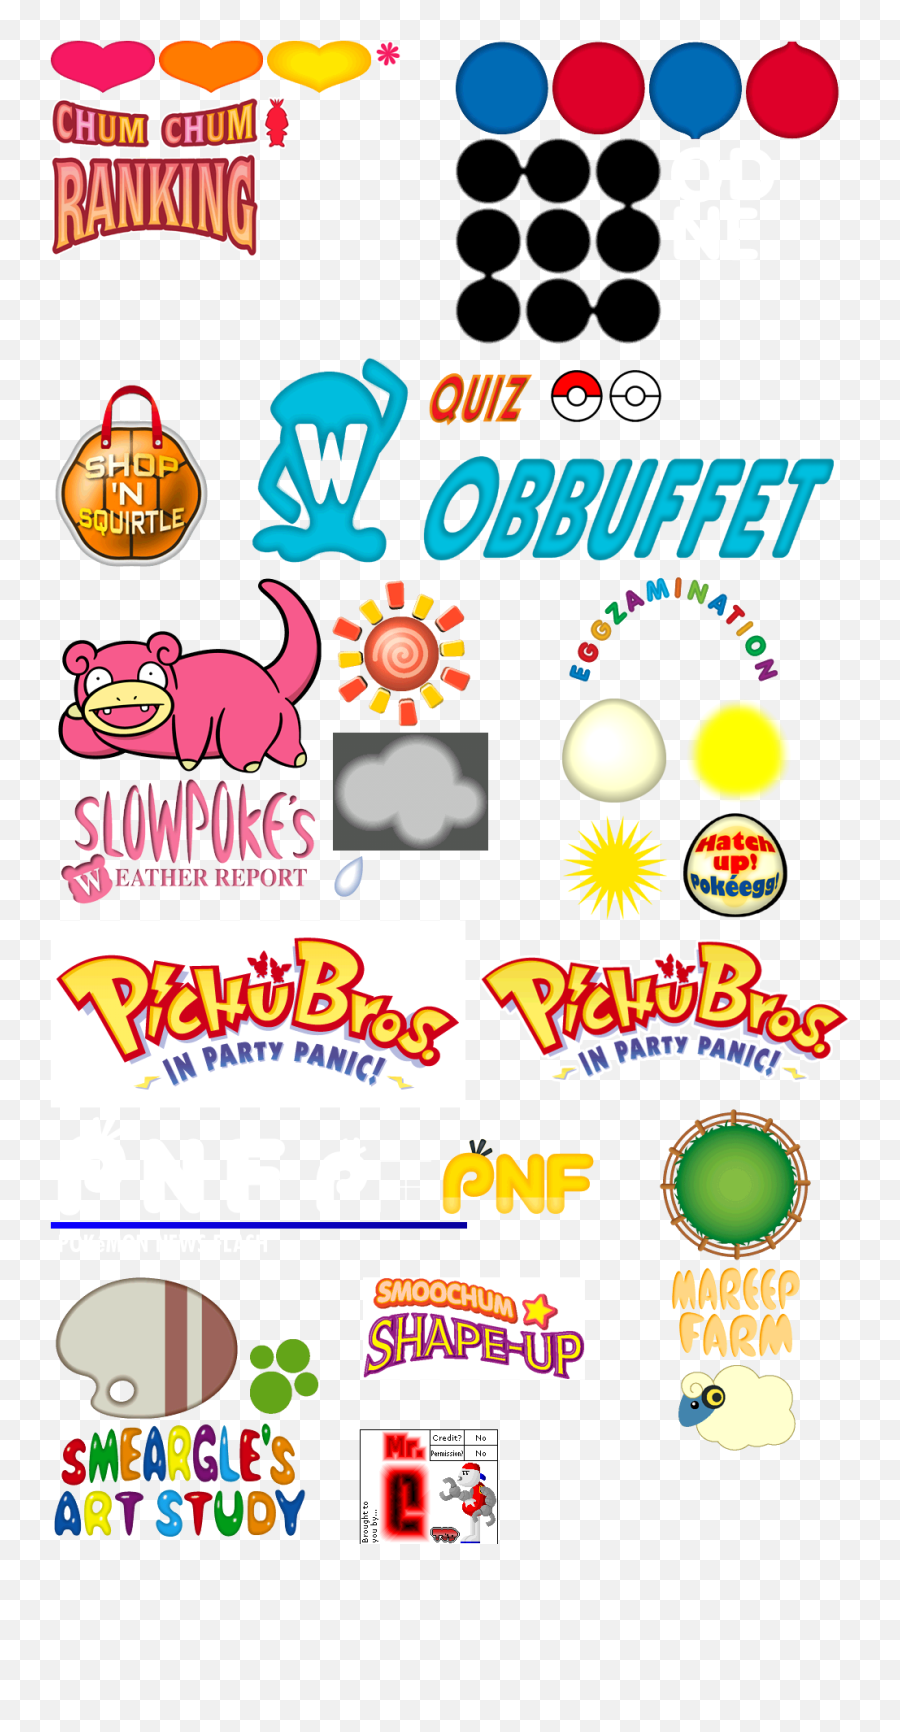 Gamecube - Pokémon Channel Channel Logos The Spriters Pichu Png,Gamecube Logo Png